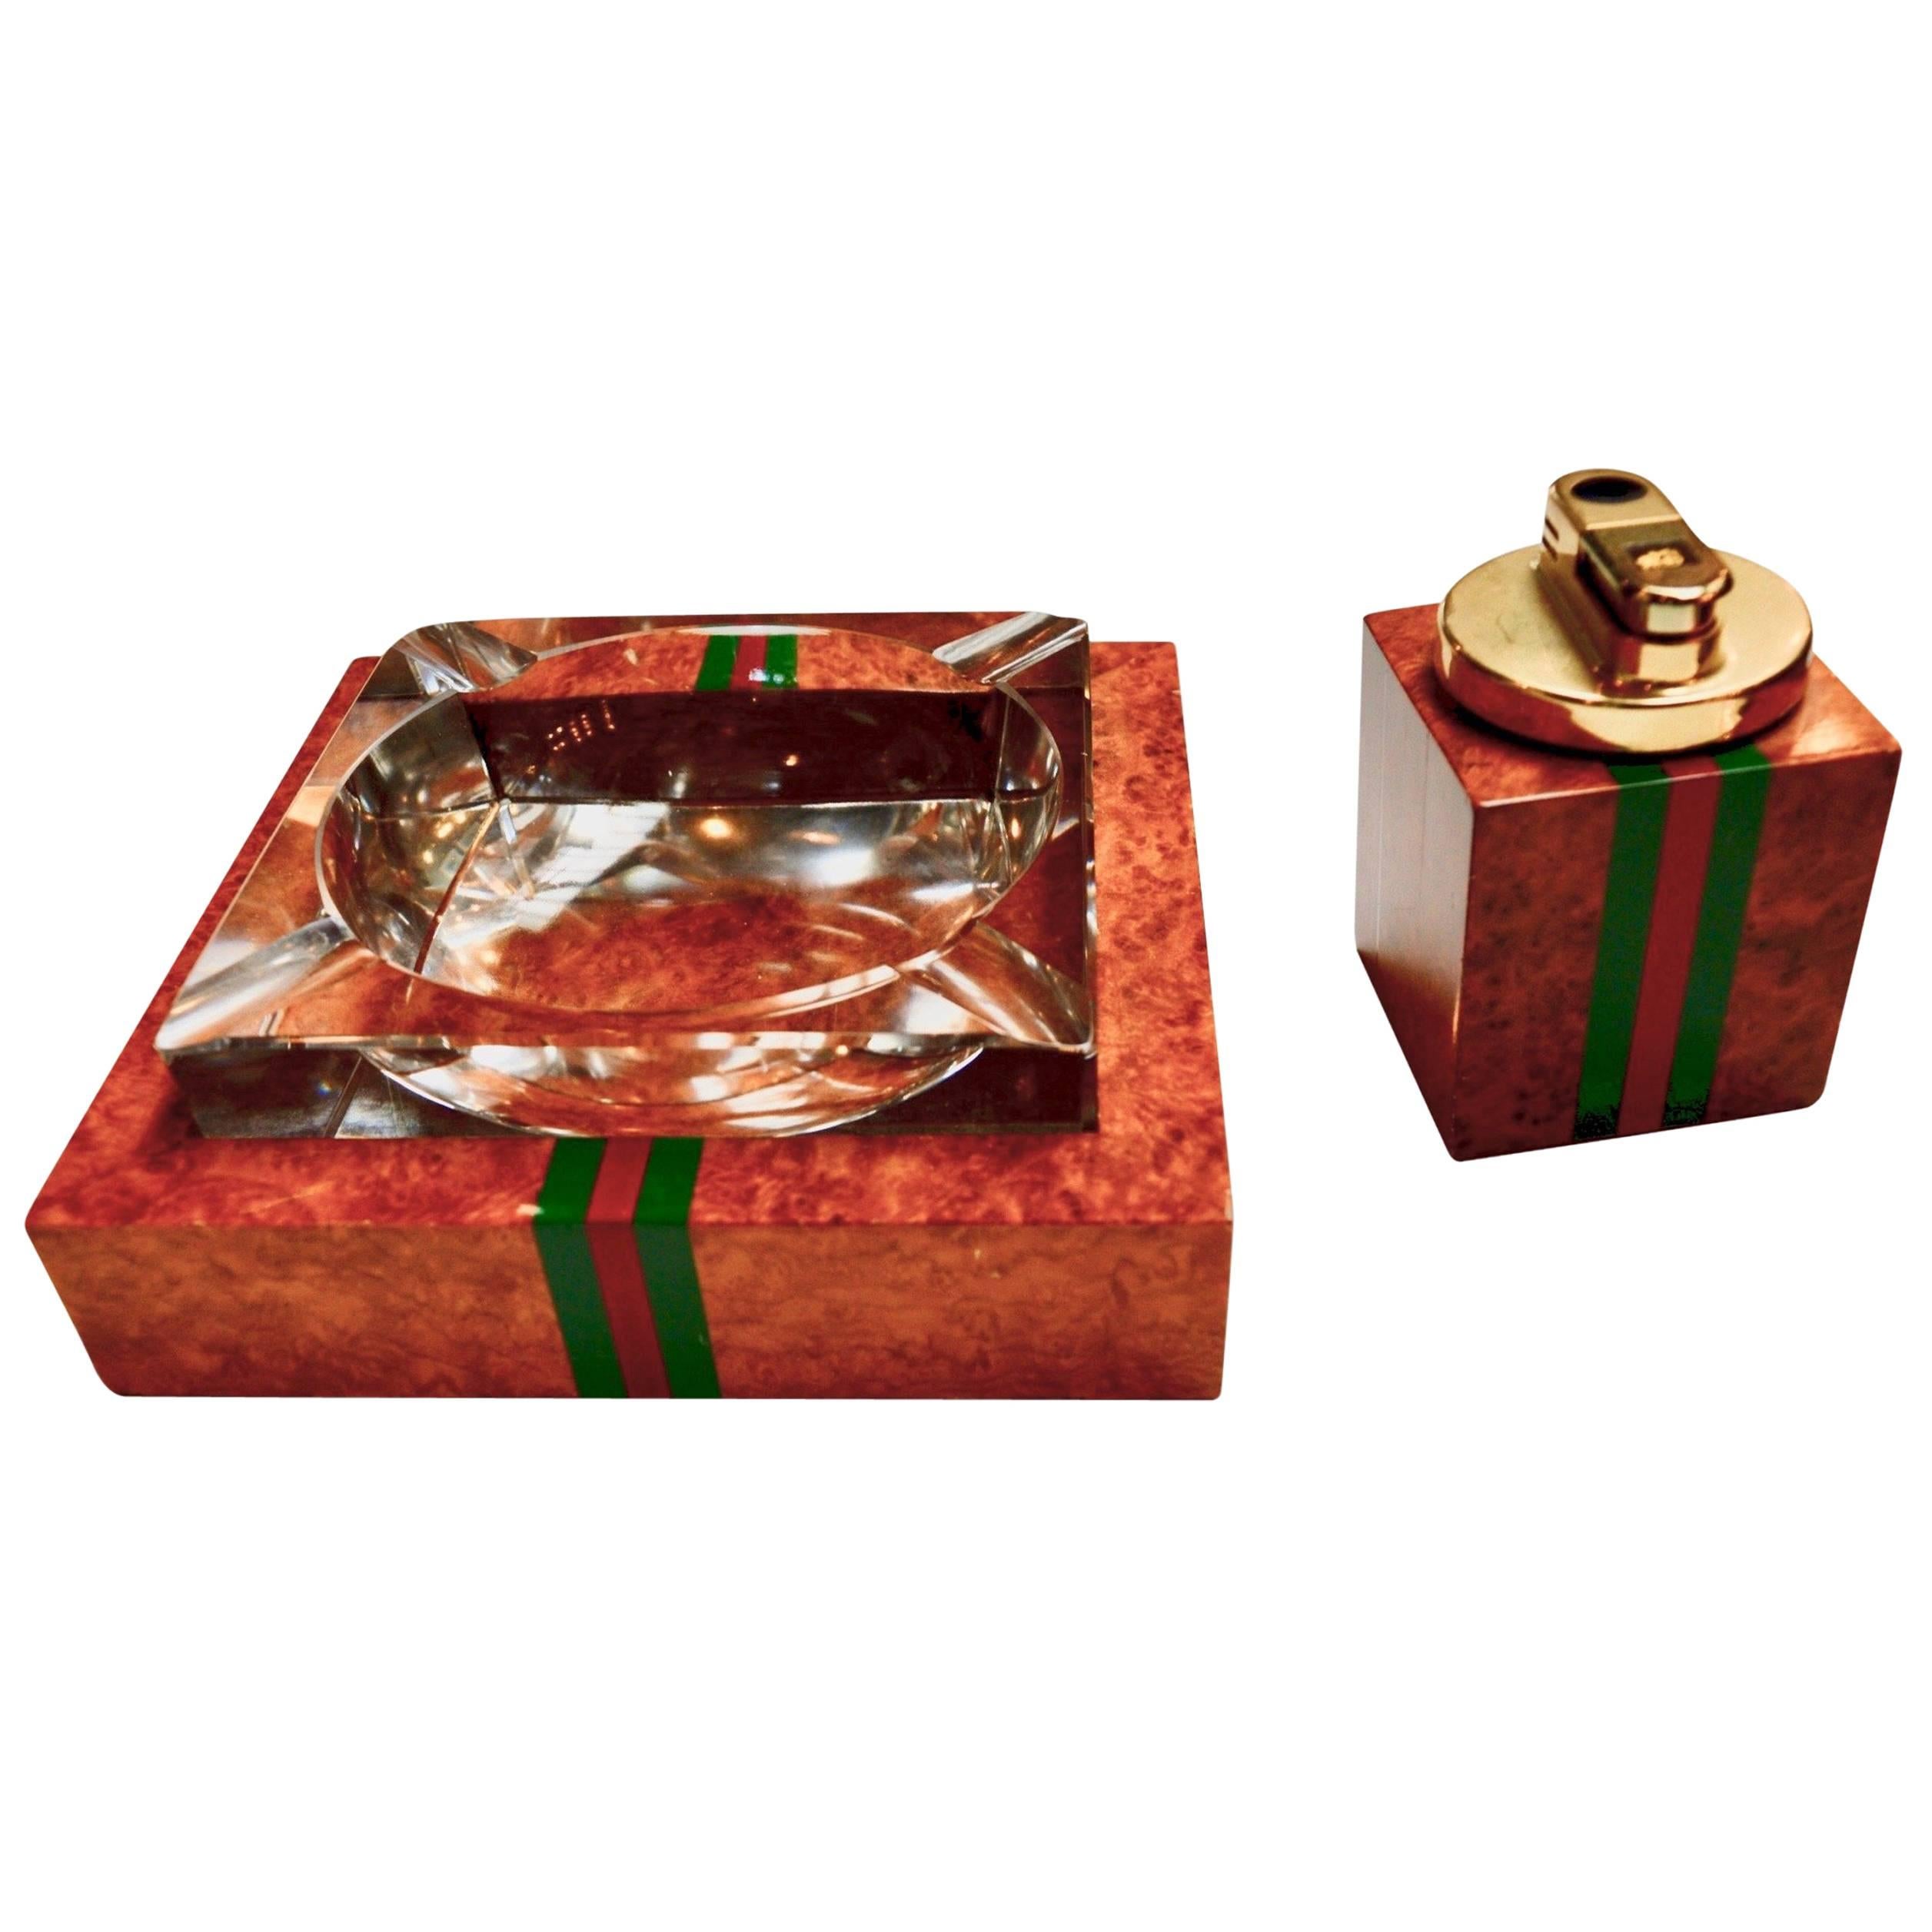 Gucci Lighter and Ashtray Set in Burl Wood